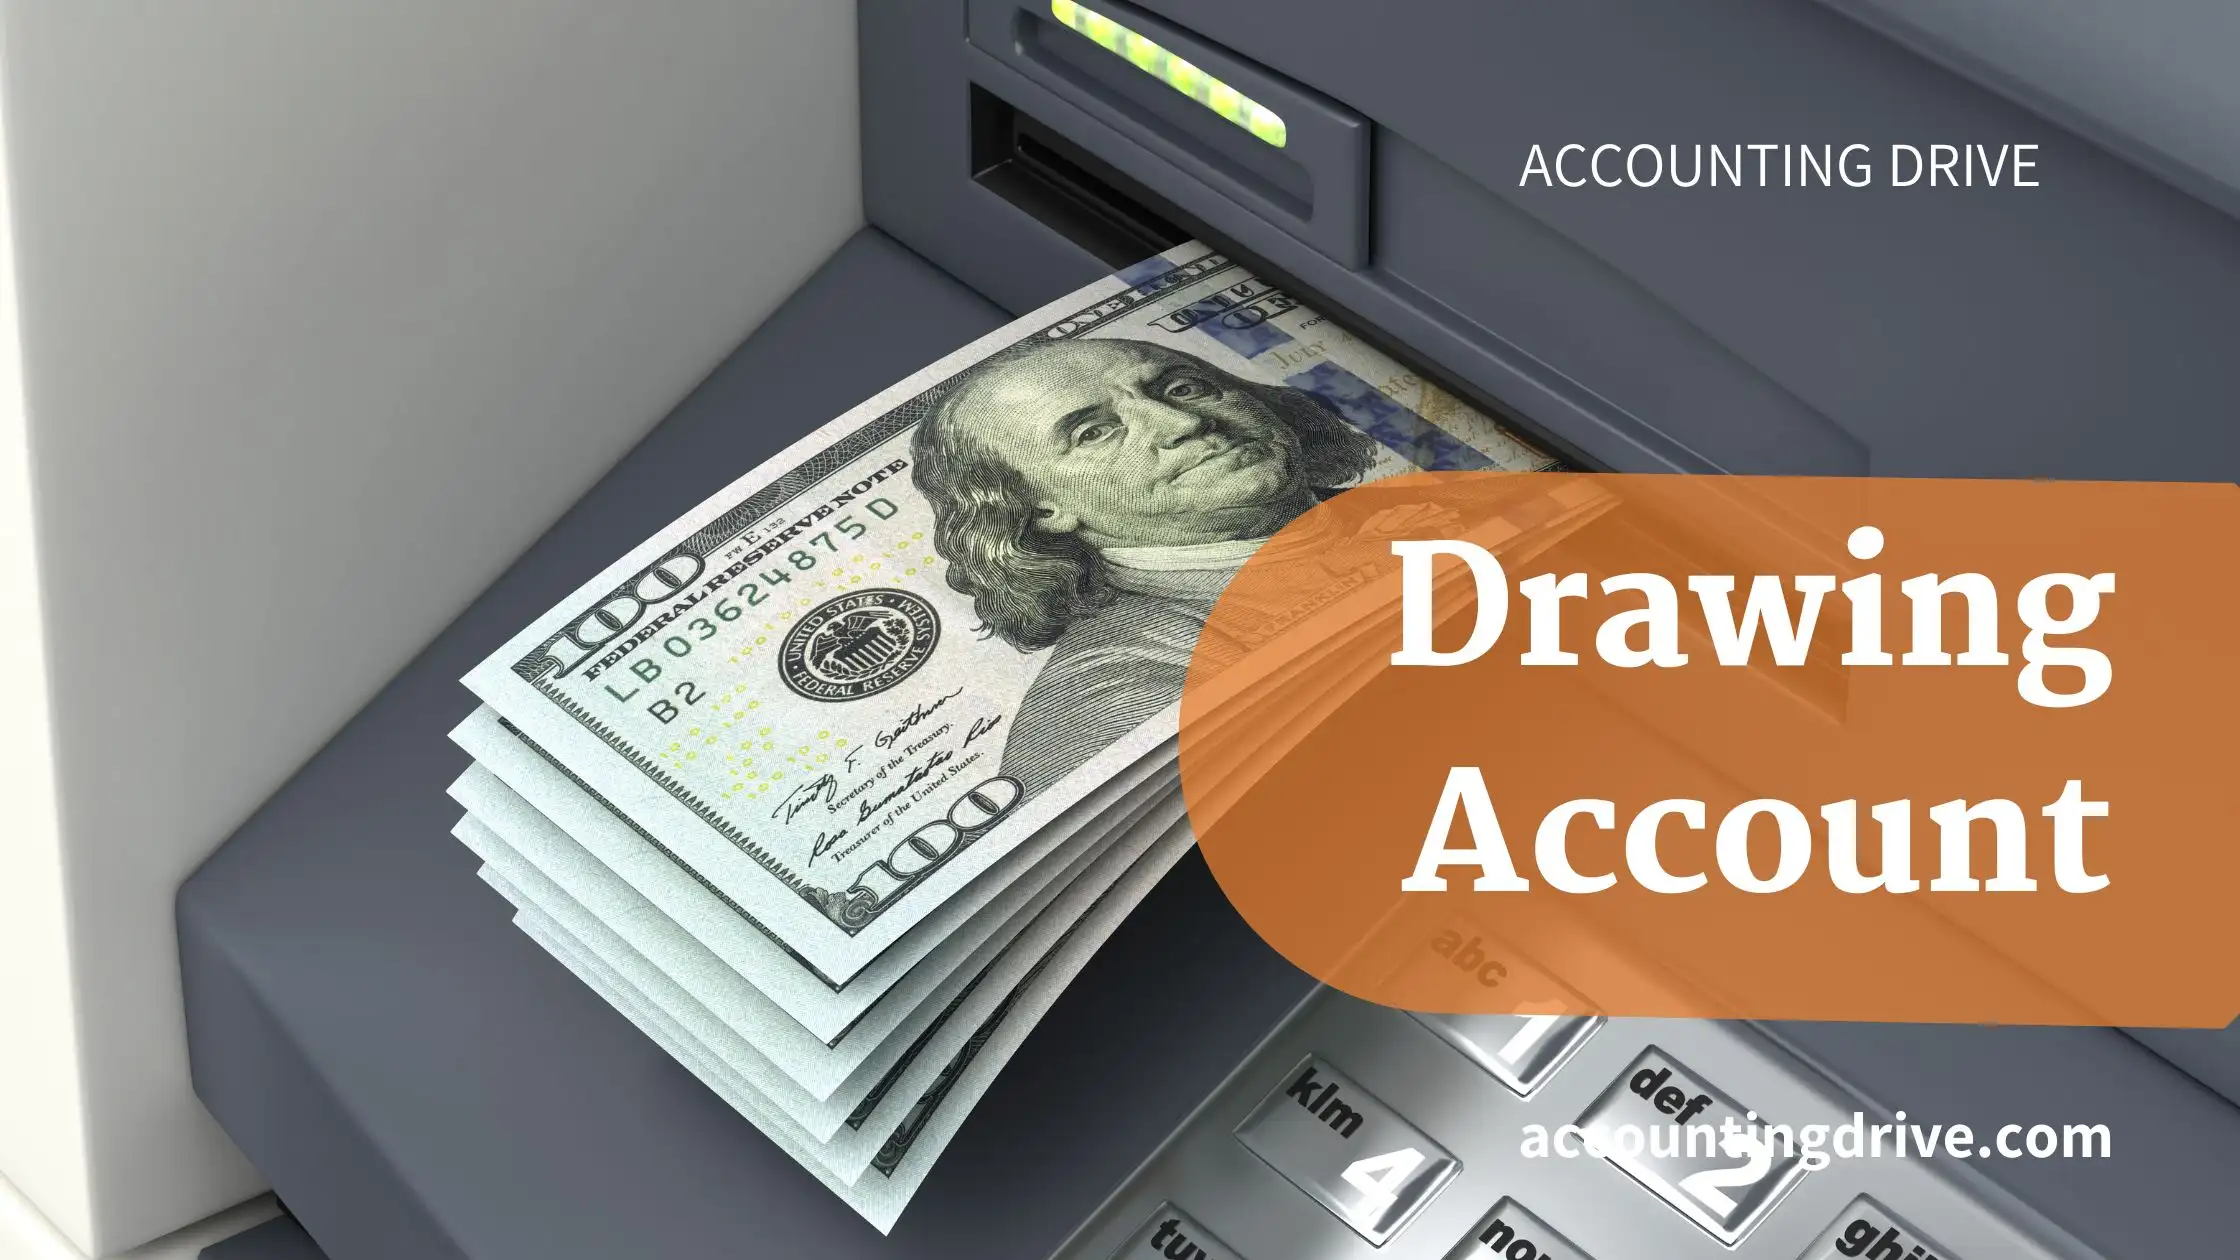 Drawing Account is Which Type of Account? Accounting Drive